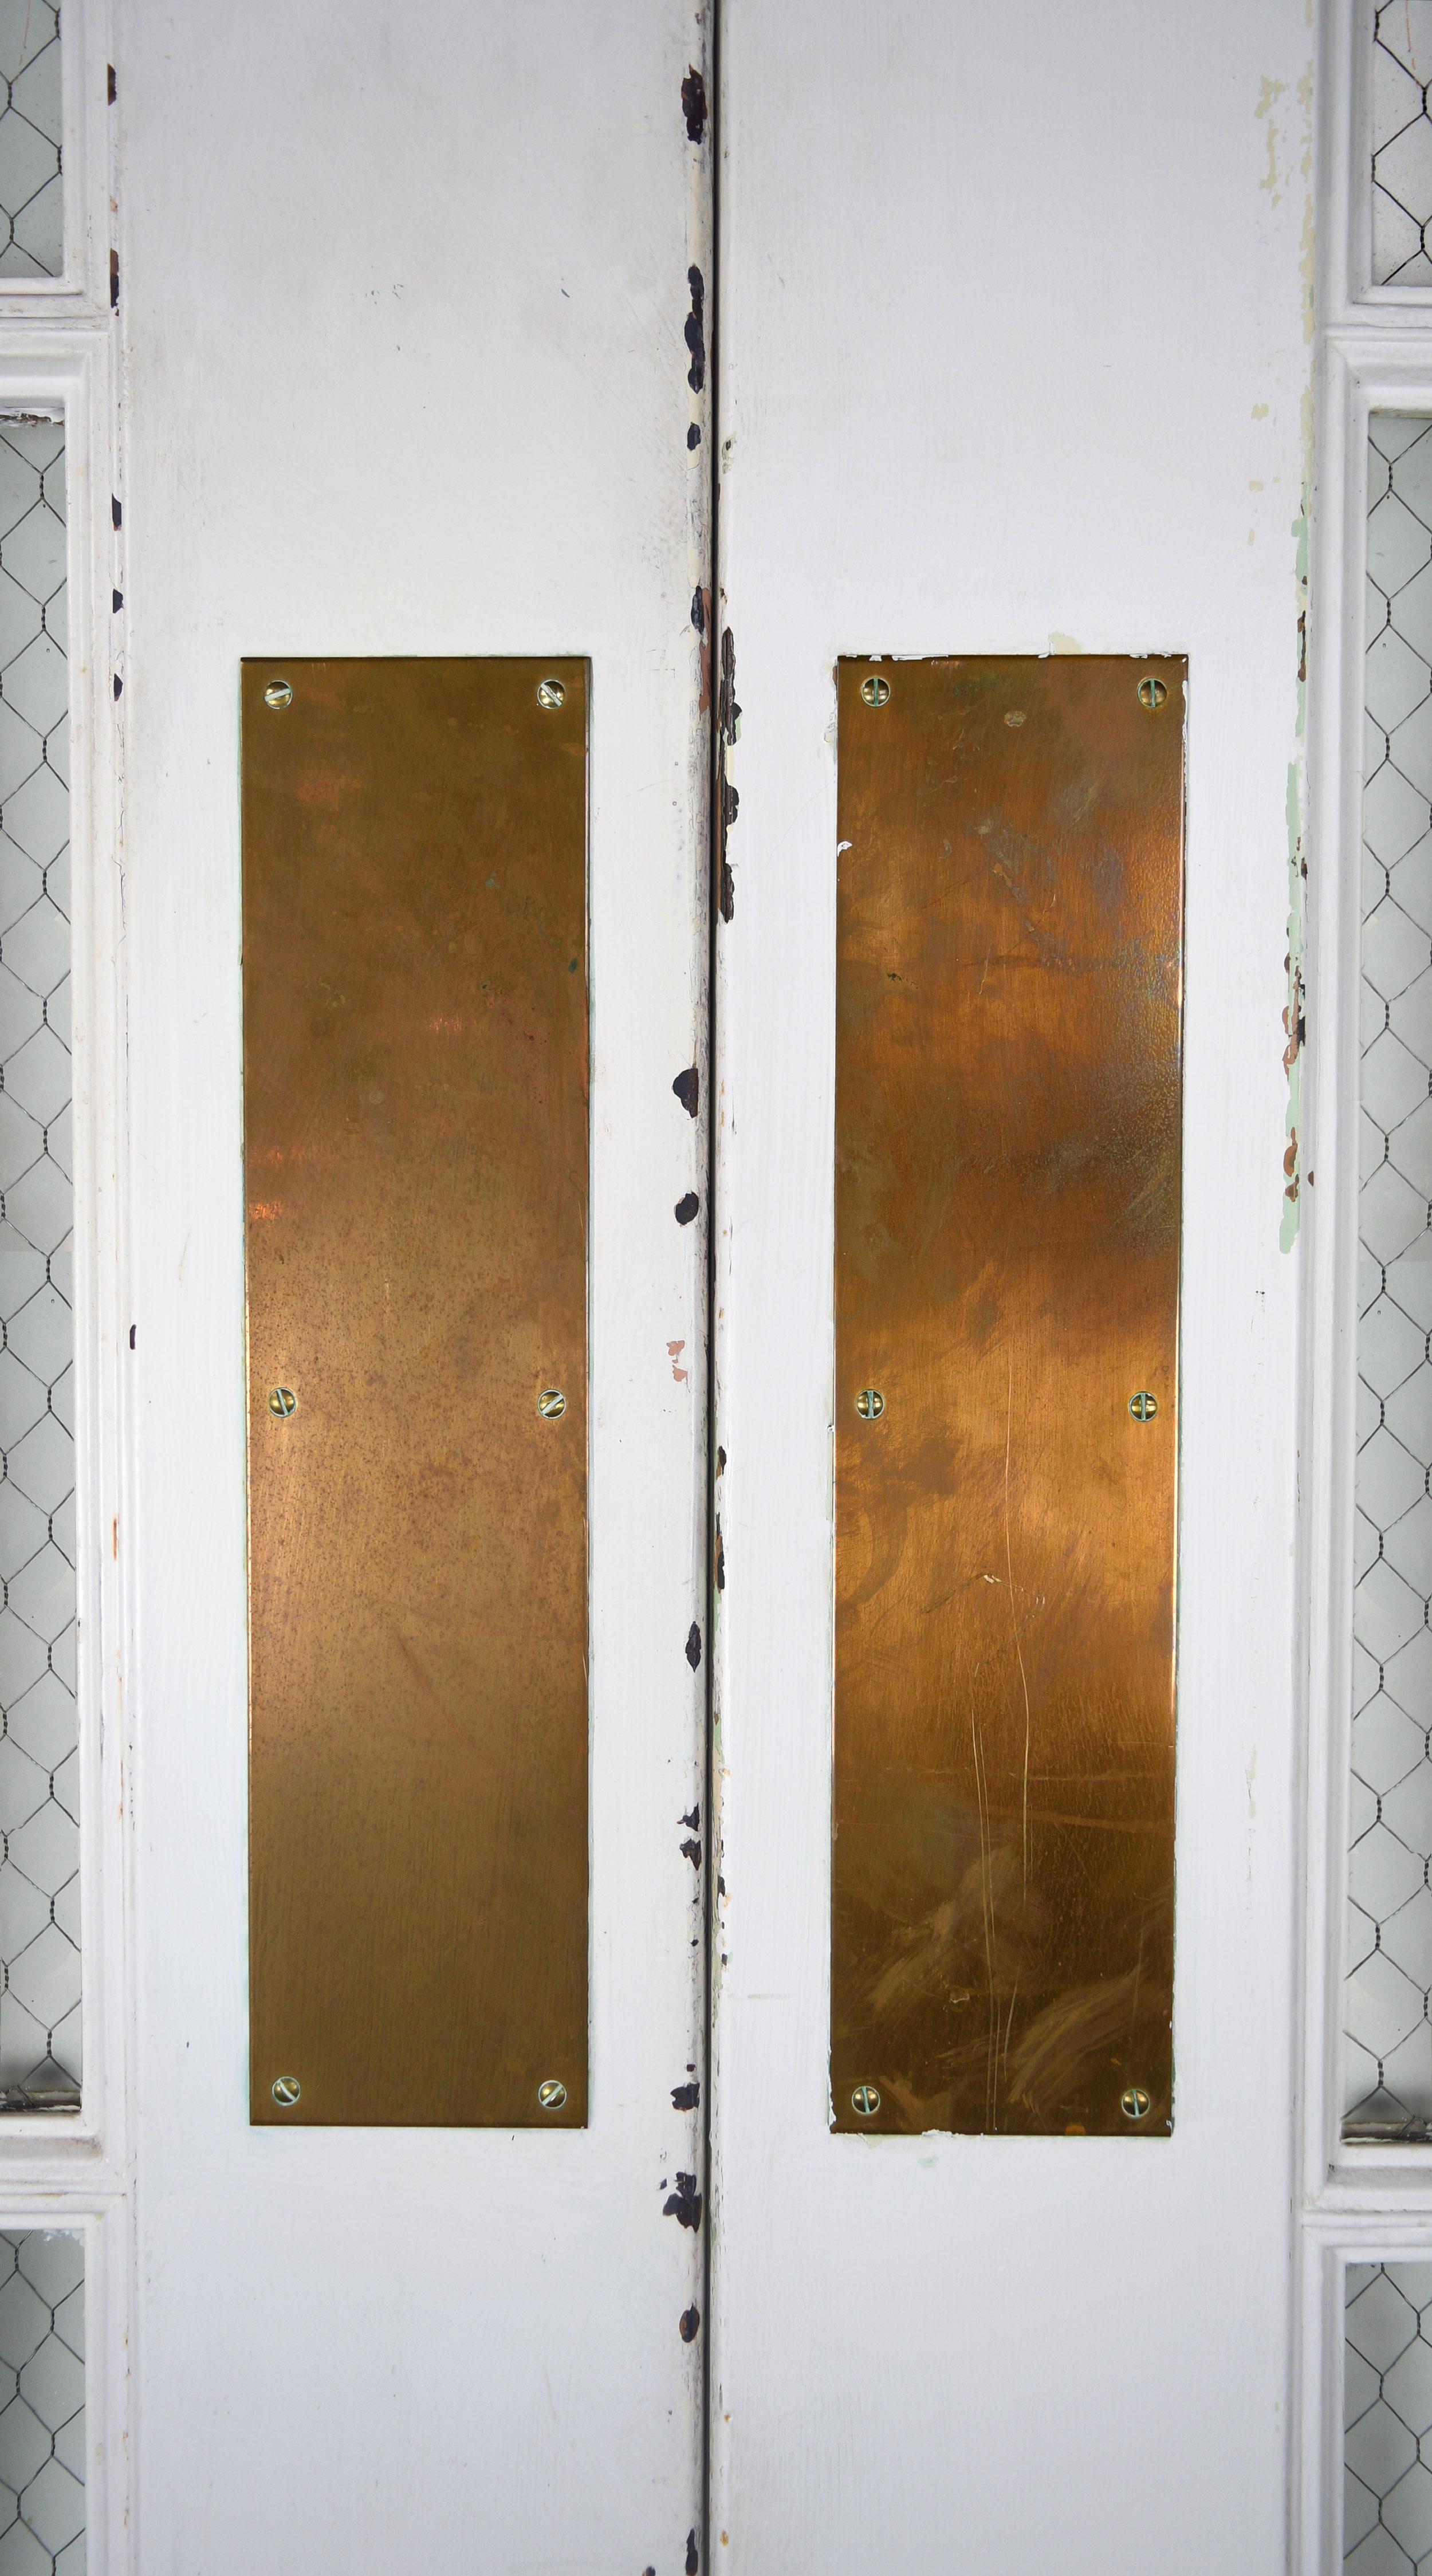 These sturdy steel double doors are well-built and feature double hinges. Their most unique feature is the chicken wire that sits within the glass adding extra strength and security. 

2 sets available 
Circa: 1920’s
Condition: Good
Finish: